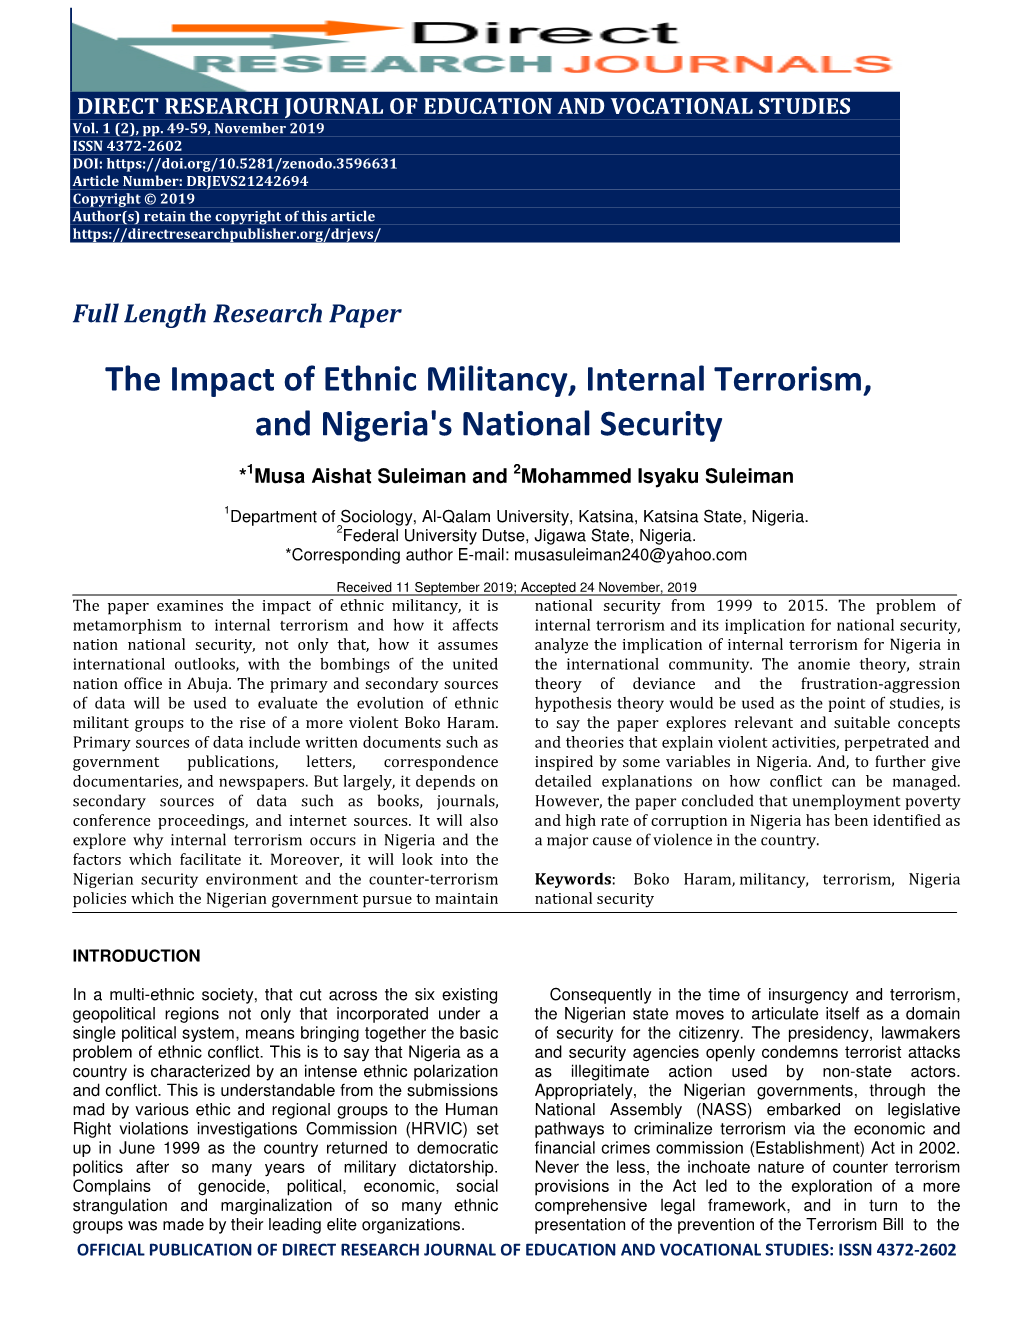 The Impact of Ethnic Militancy, Internal Terrorism, and Nigeria's National Security